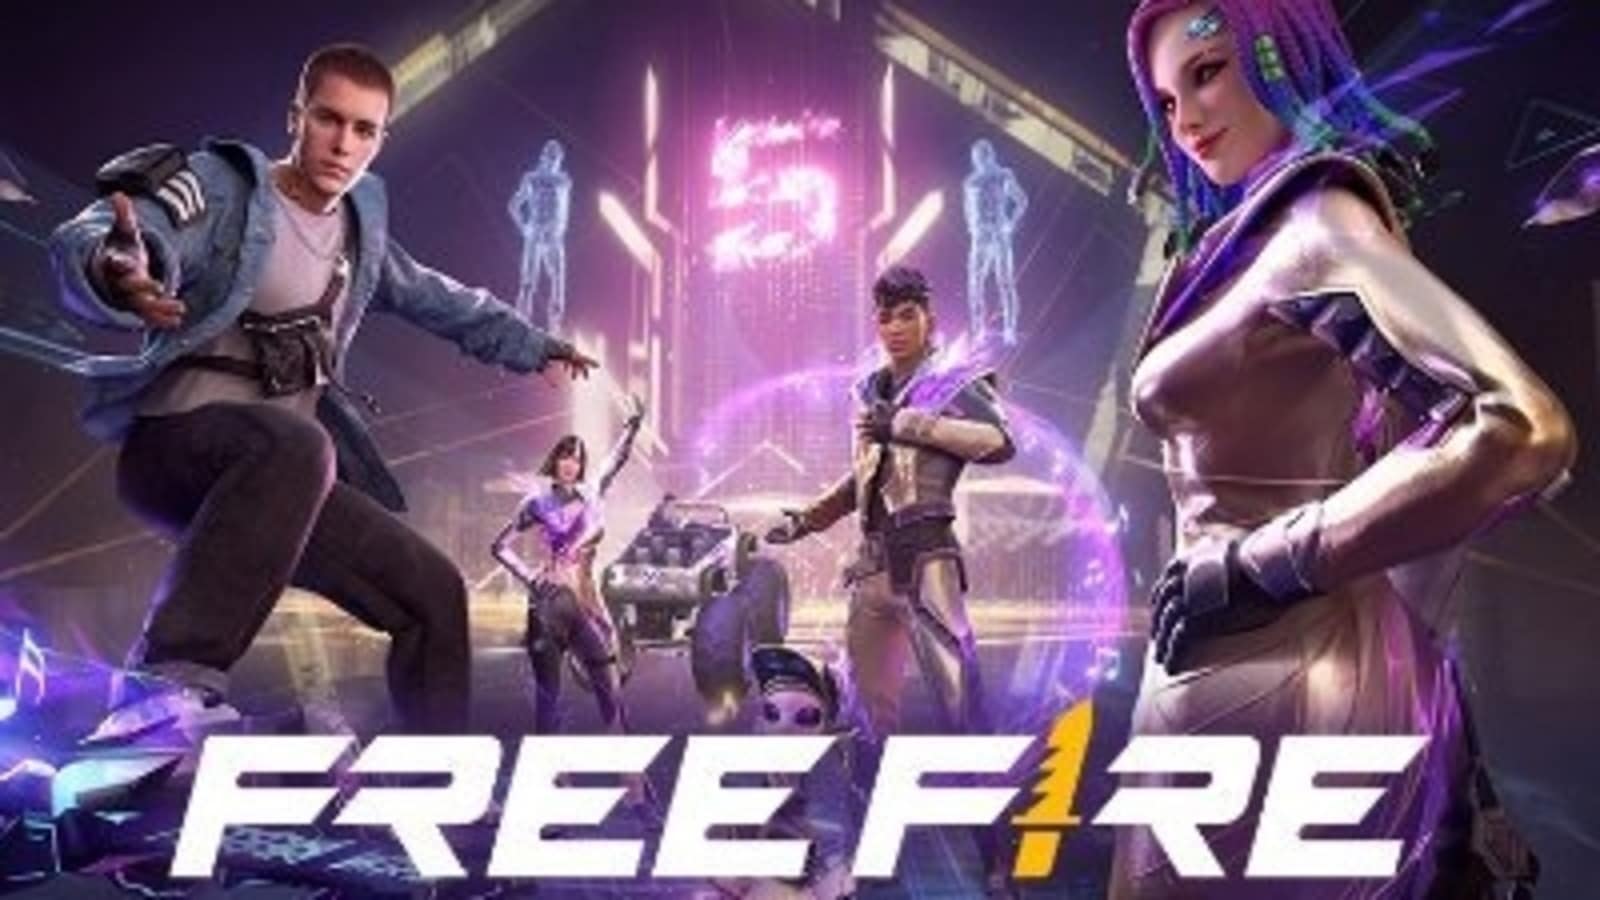 How To Get Unlimited Diamonds in Garena Free Fire